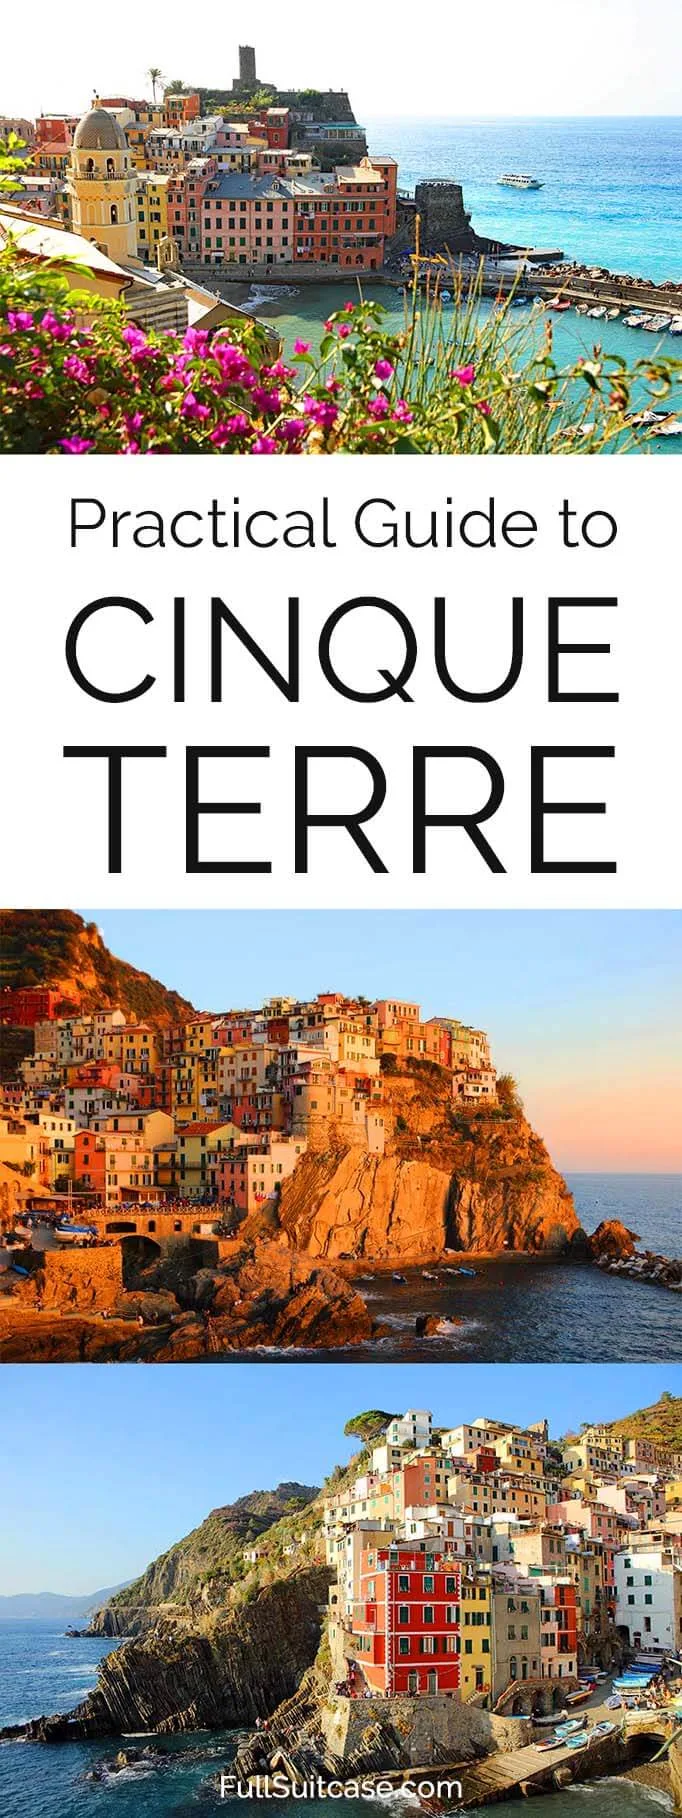 Practical information for visiting Cinque Terre villages in Italy #CinqueTerre #Italy